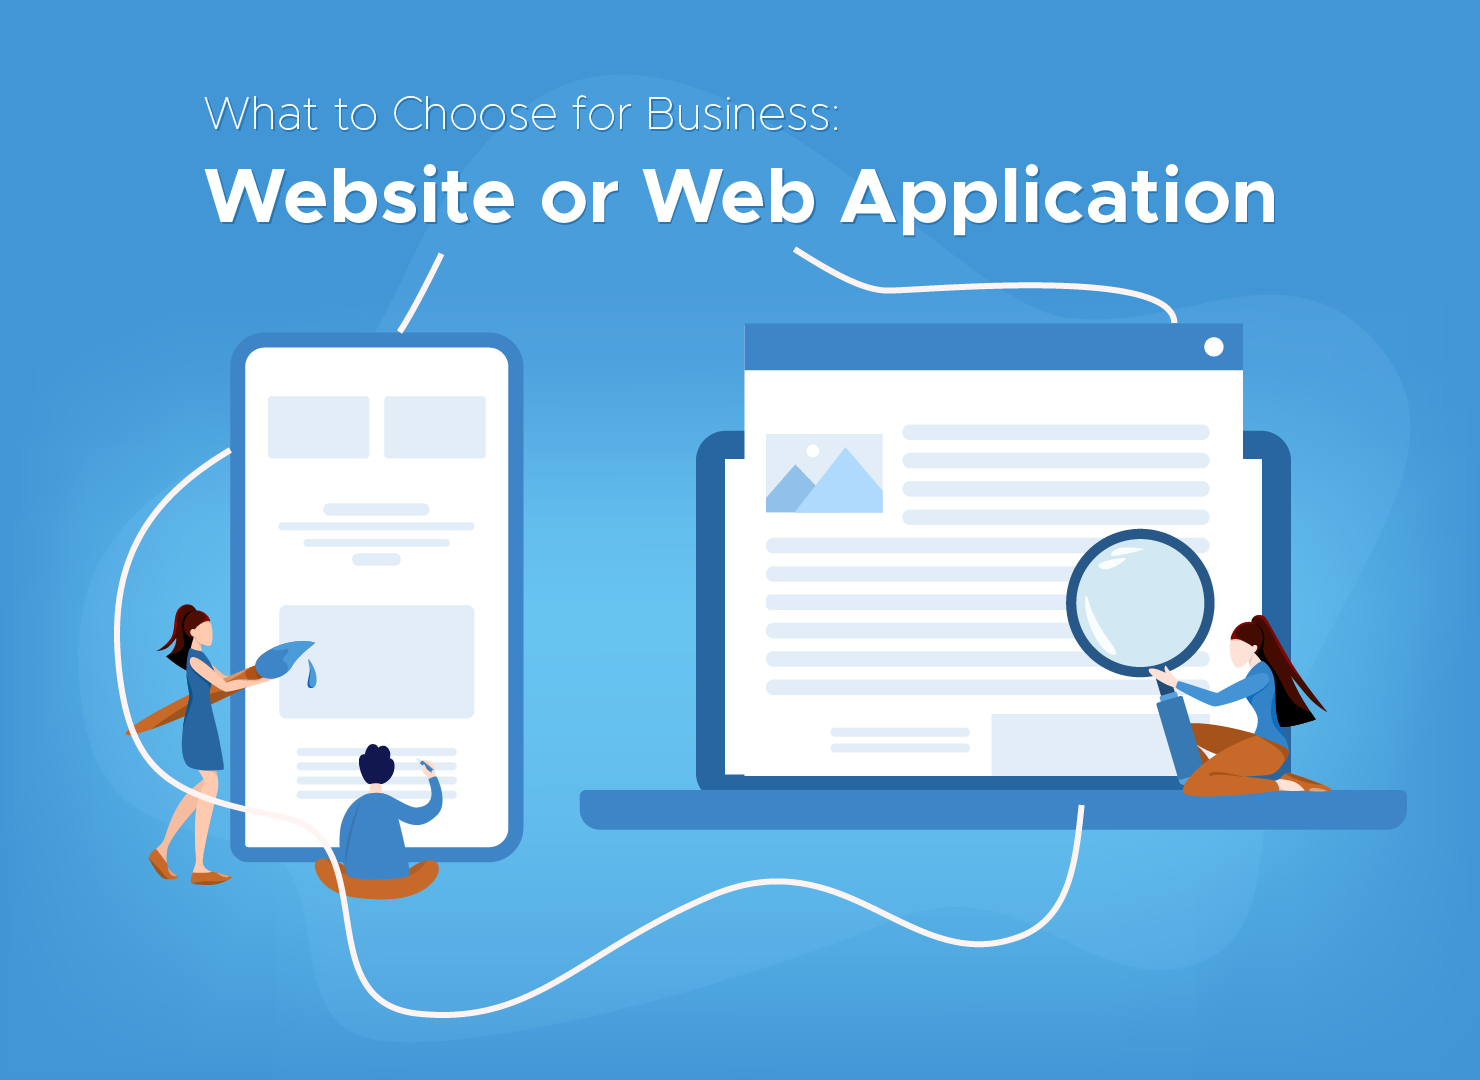 What to Choose for Business: Website or Web Application